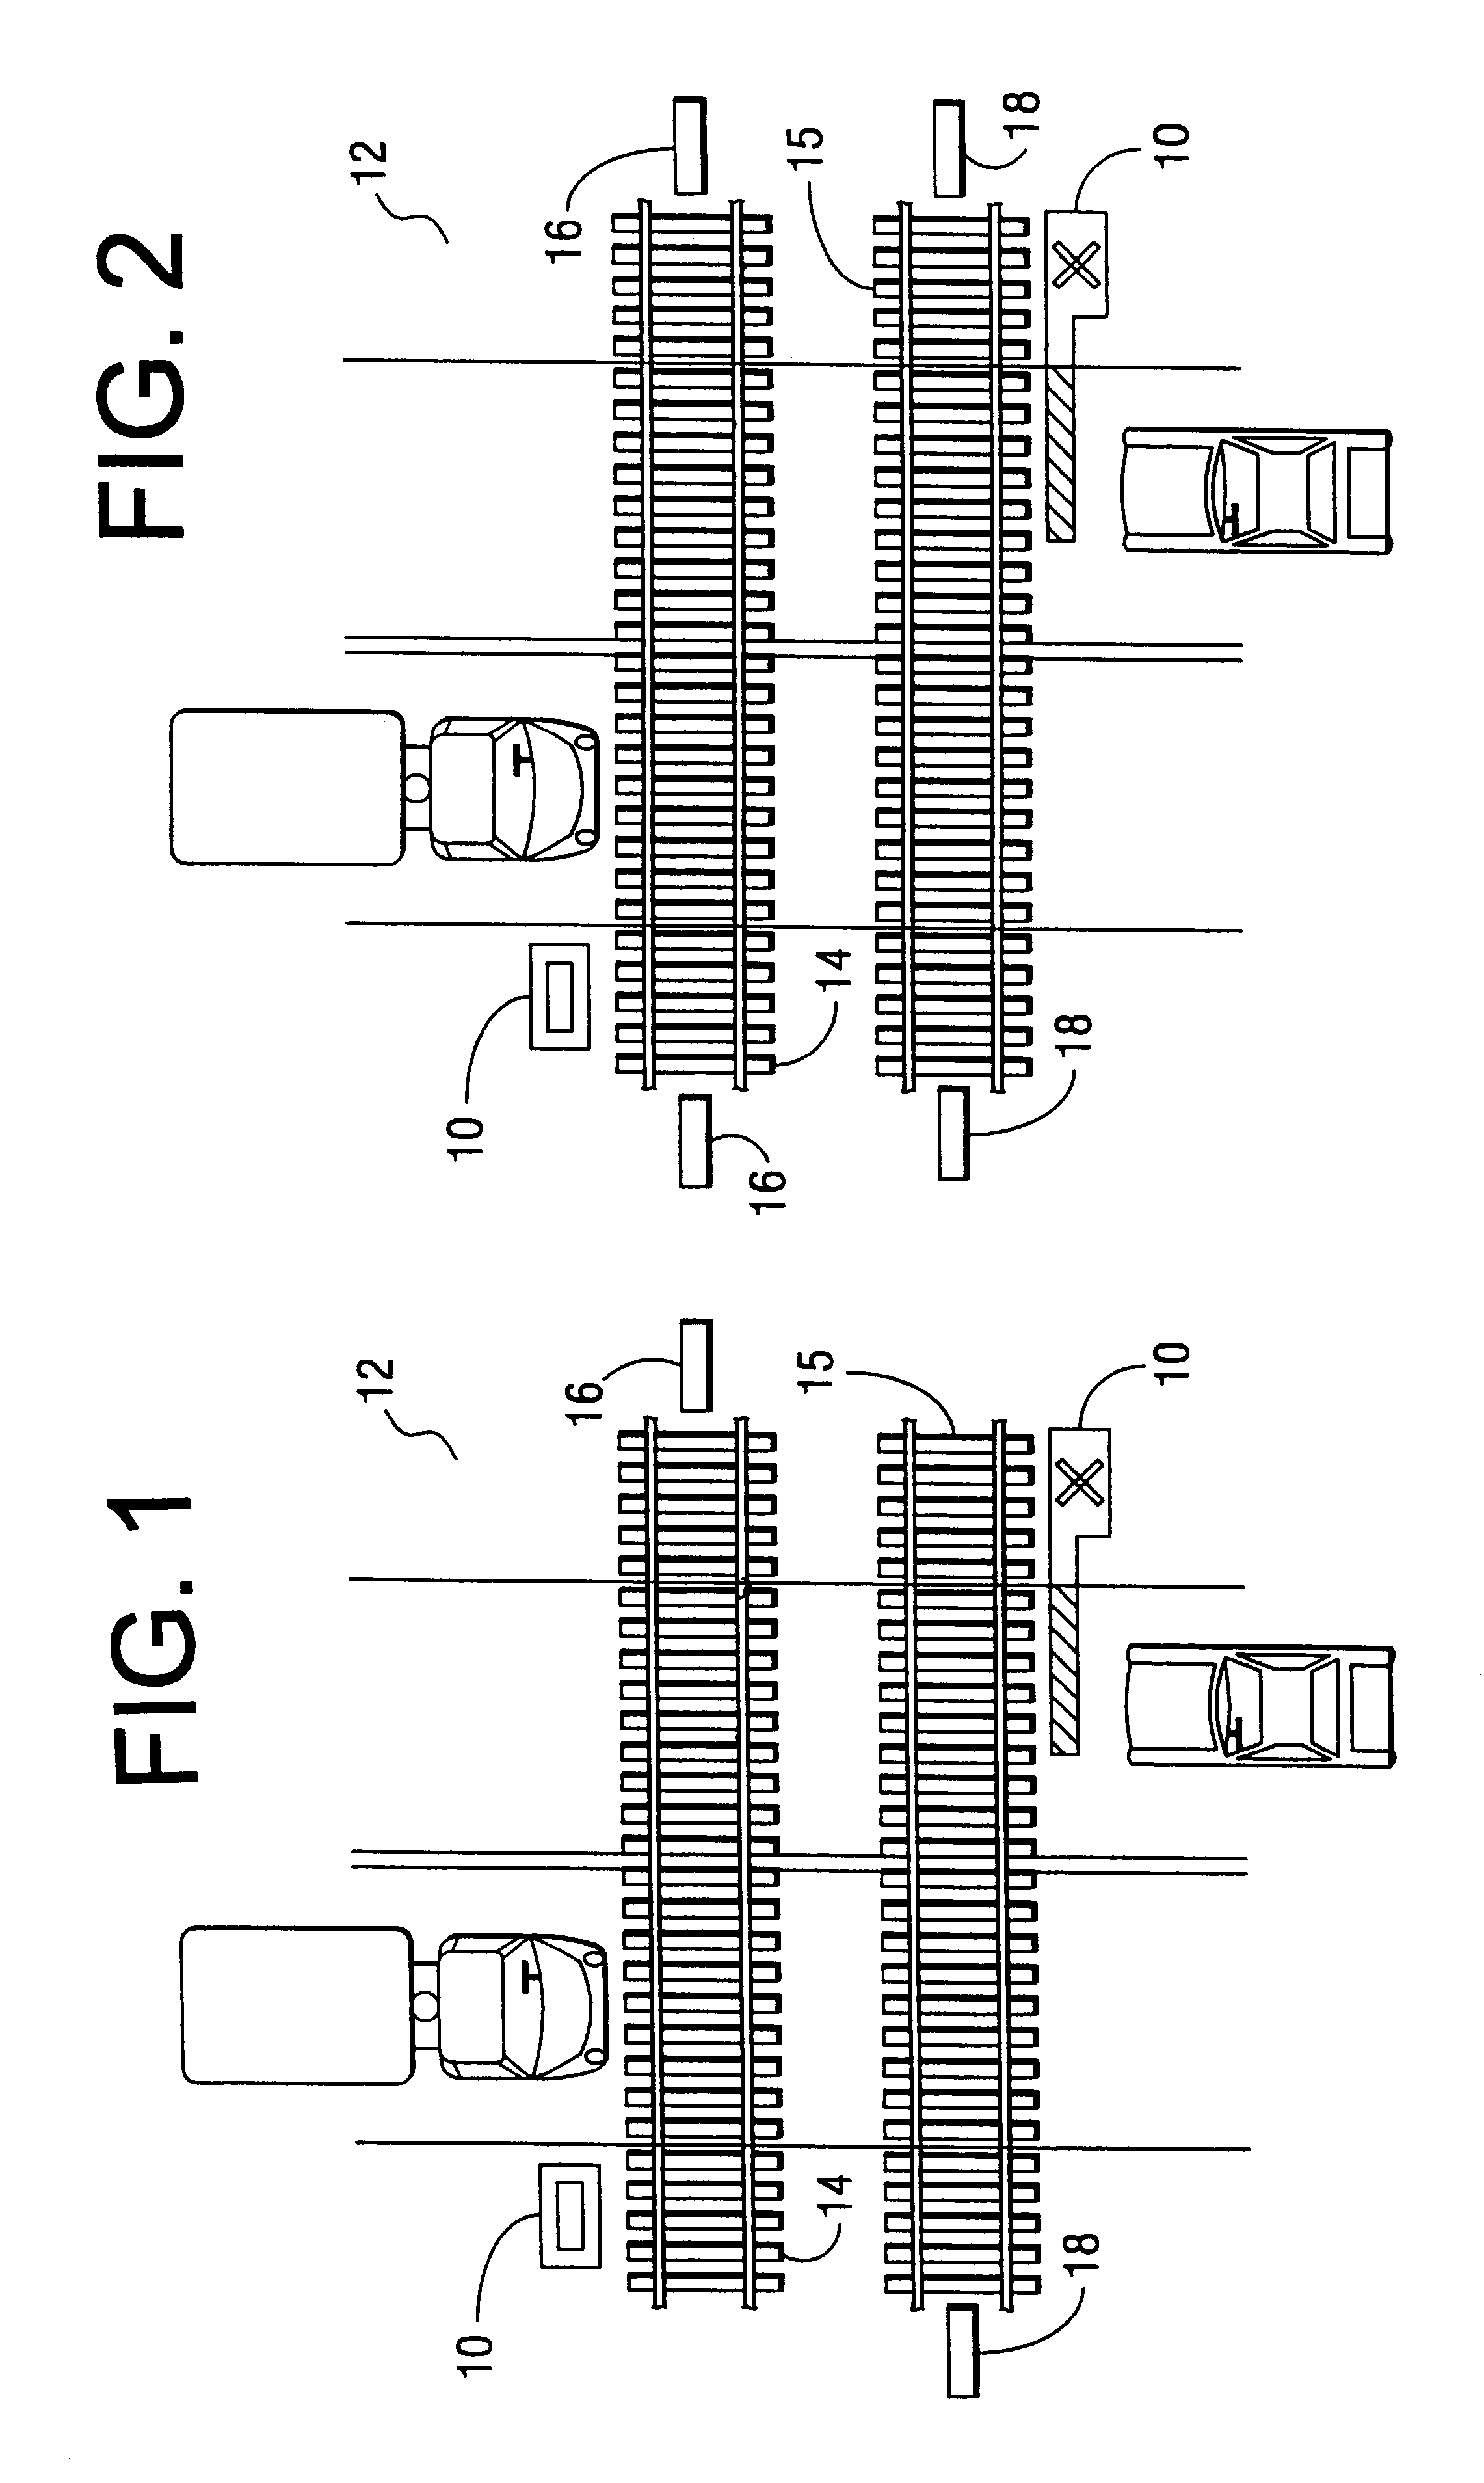 Method and apparatus for indicating the presence of a train at a railroad crossing